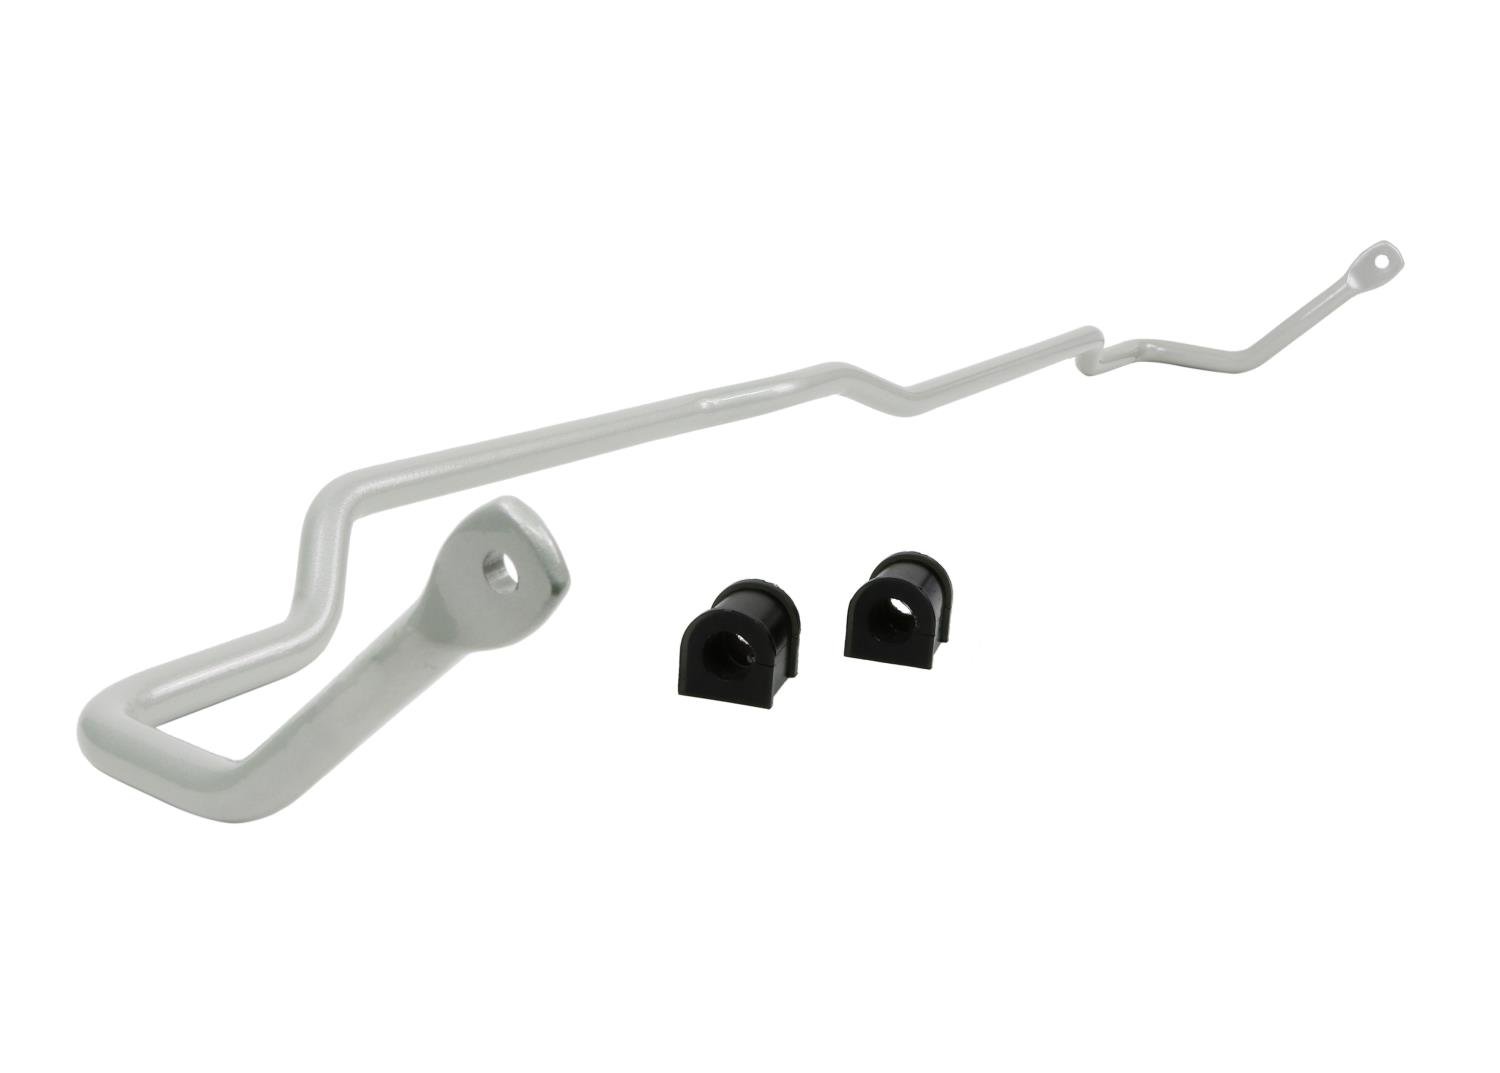 BTR71 Rear 18 mm H/D Fixed Sway Bar for 1993-1999 Toyota Corolla AE101/102, 1998-2002 Corolla AE-ZZE110/111